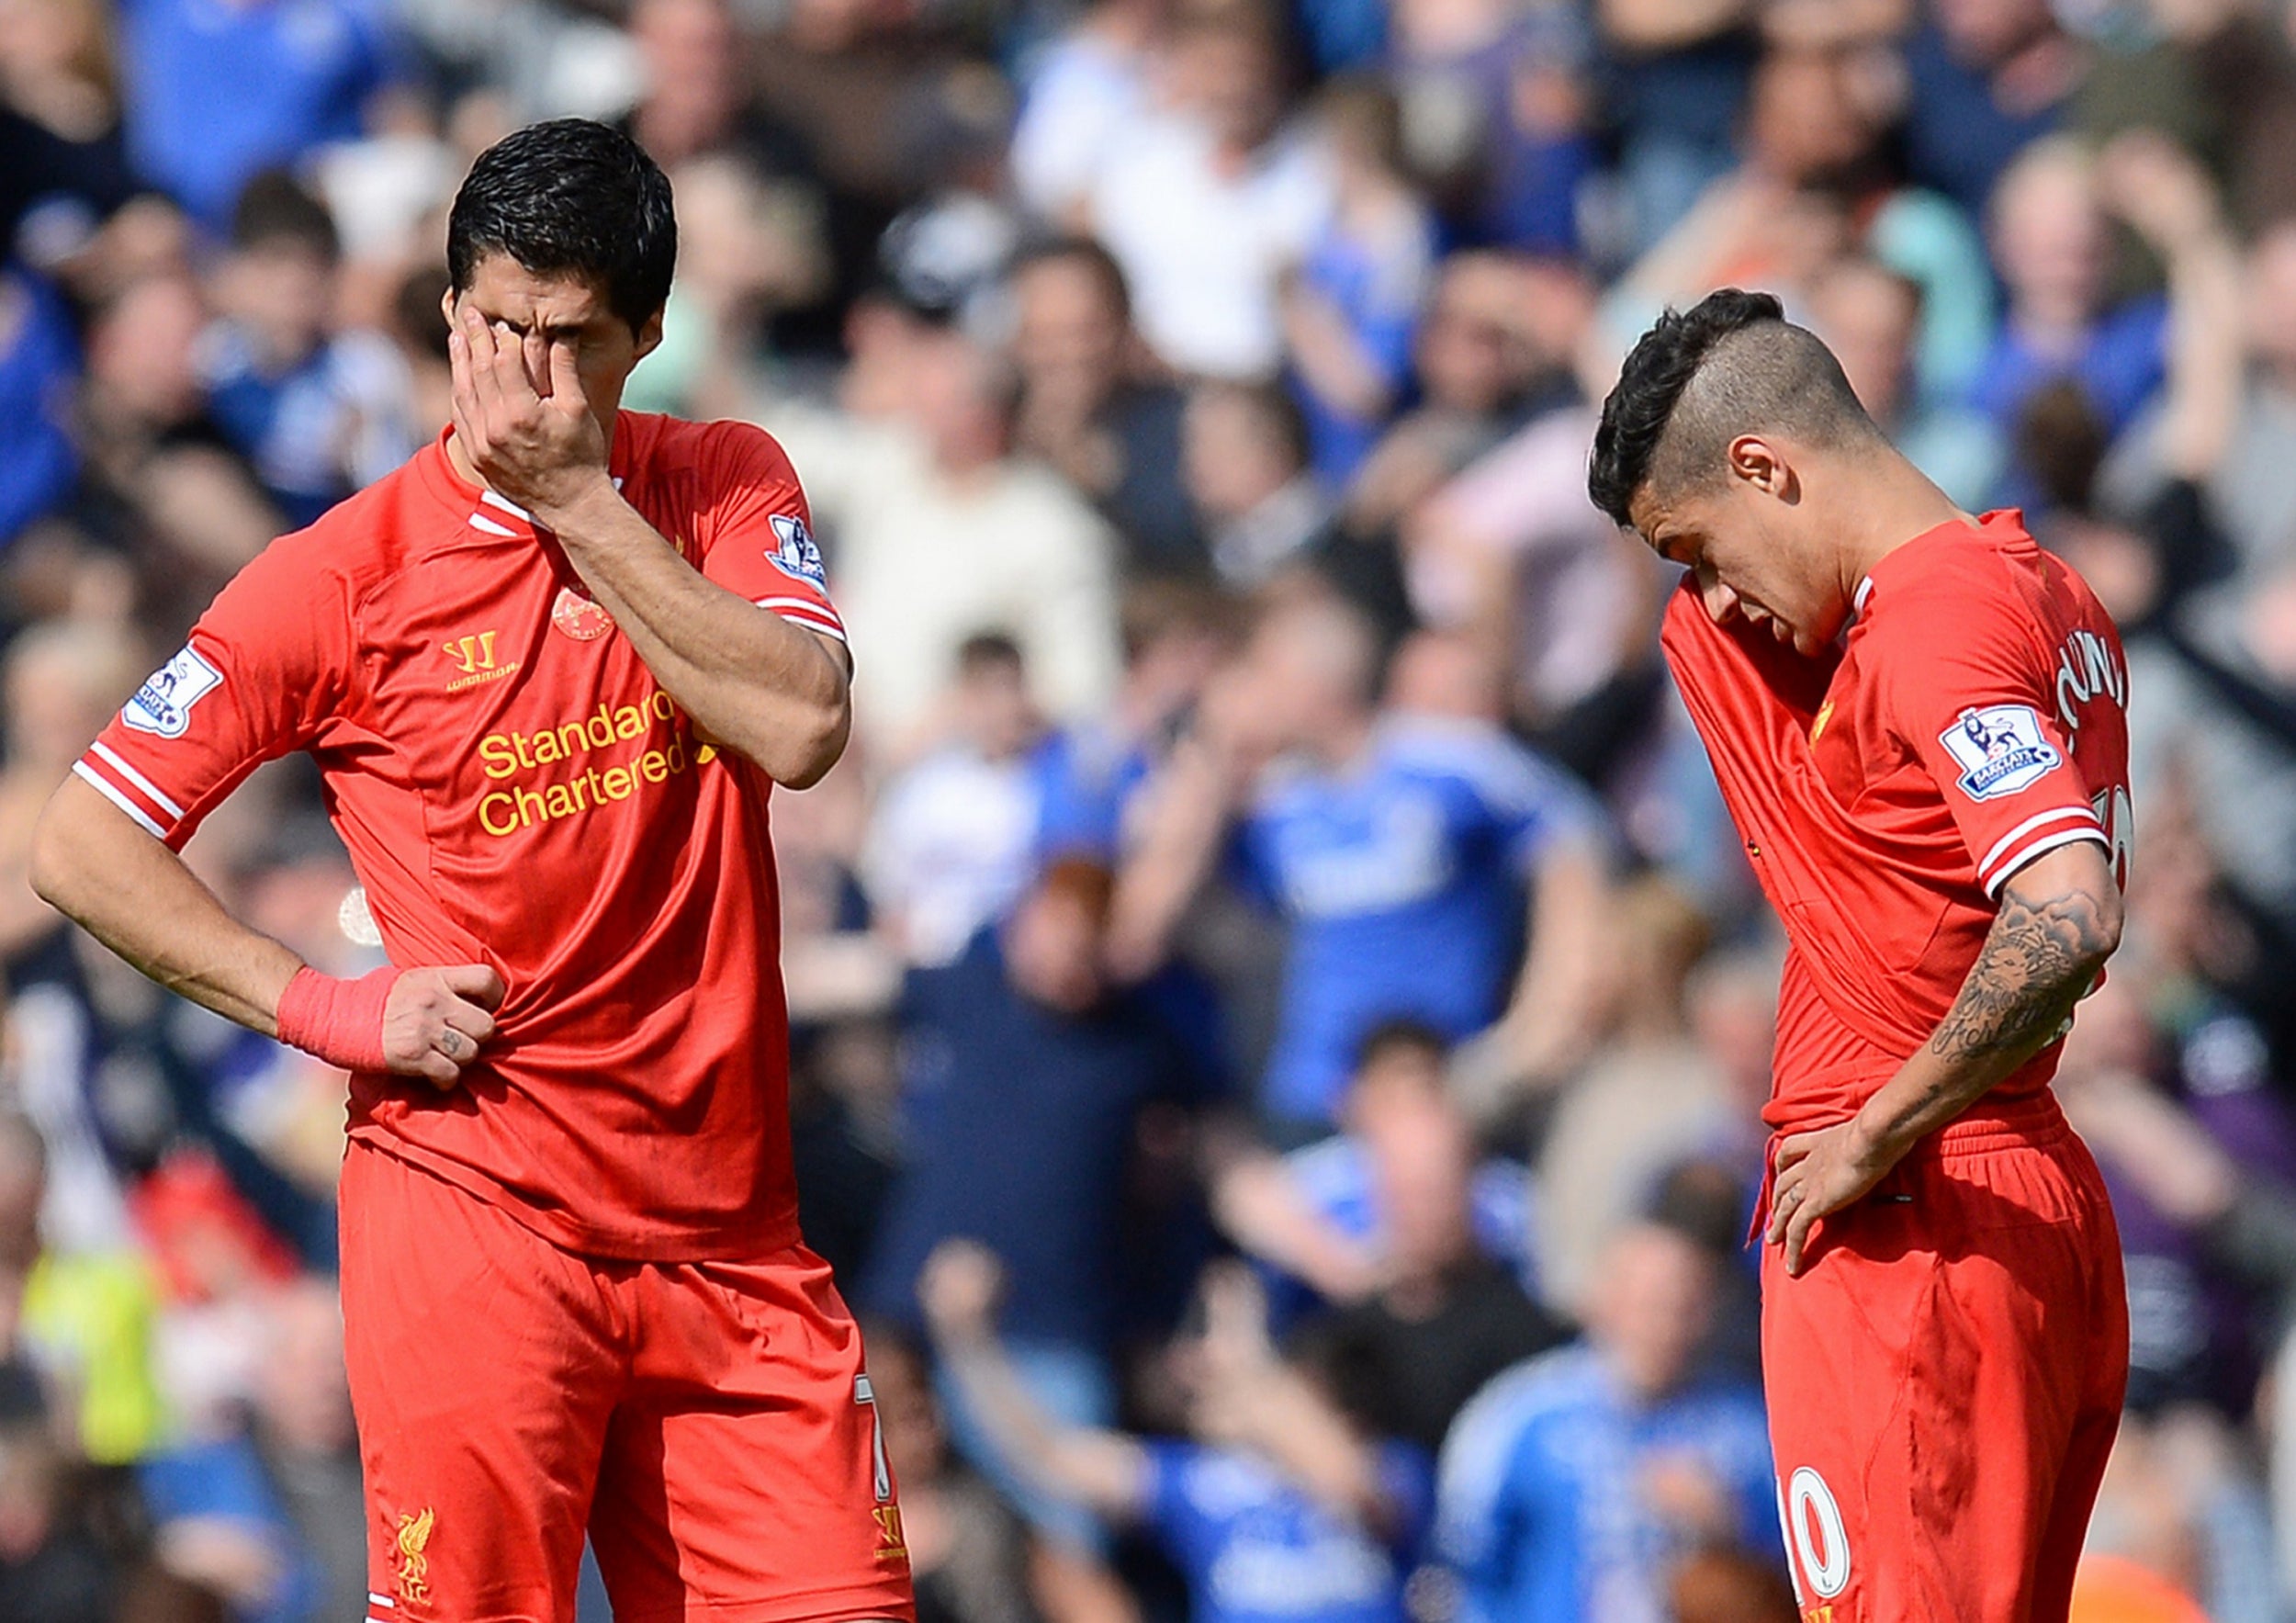 Liverpool saw their dreams of a first title collapse (AFP/Getty Images)